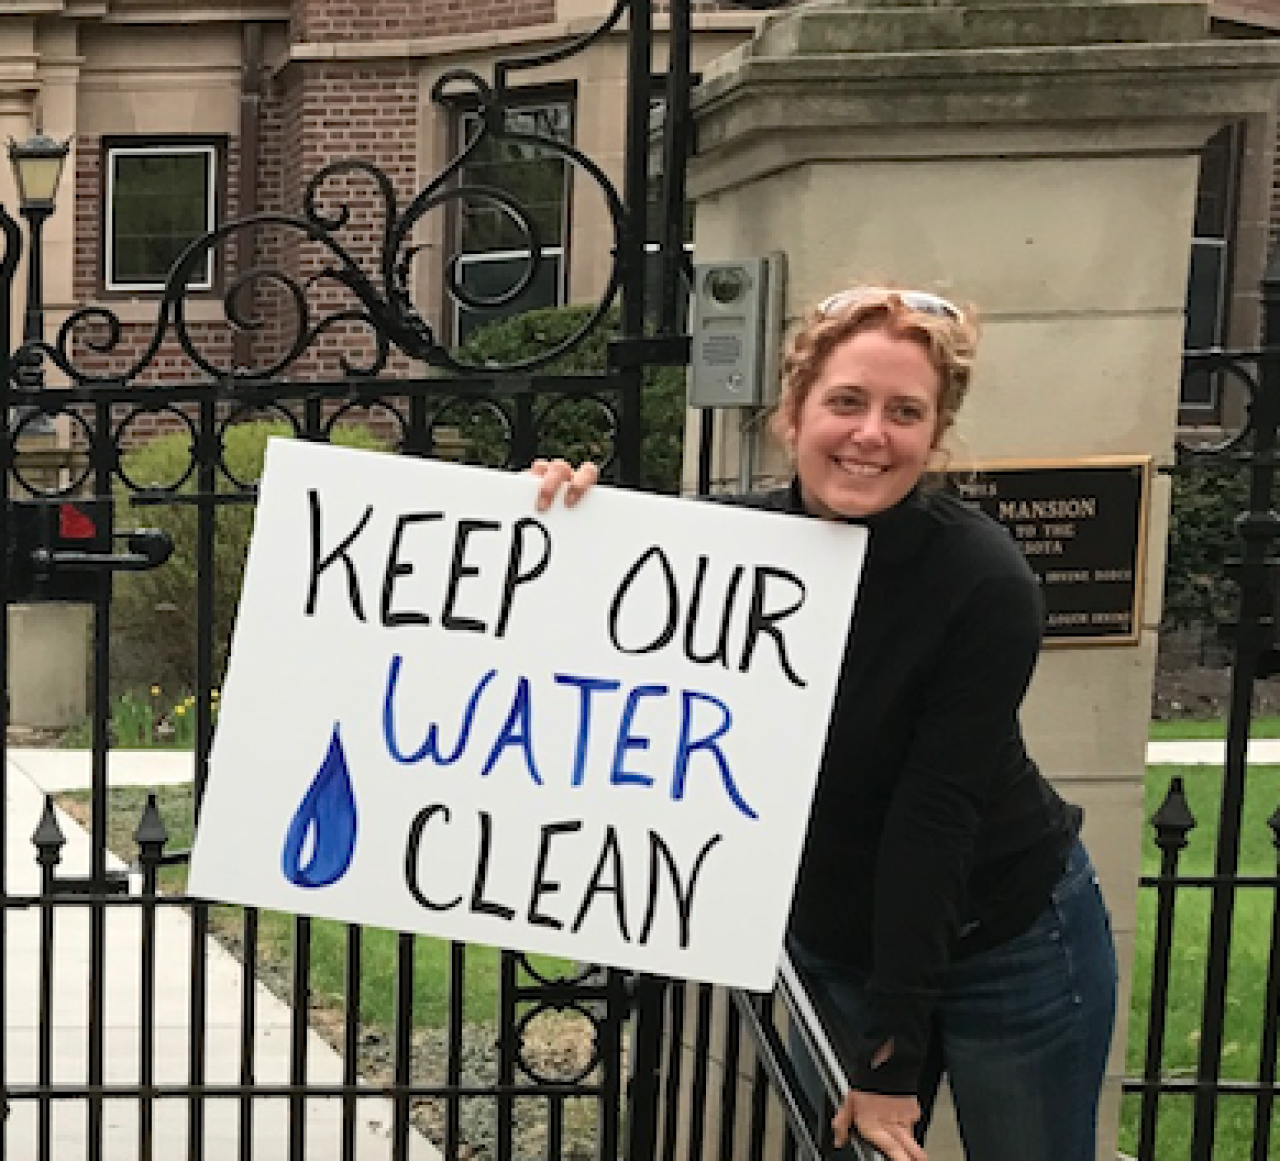 Clean water advocates remind Gov. Dayton to stay strong at the Governor's Residence.